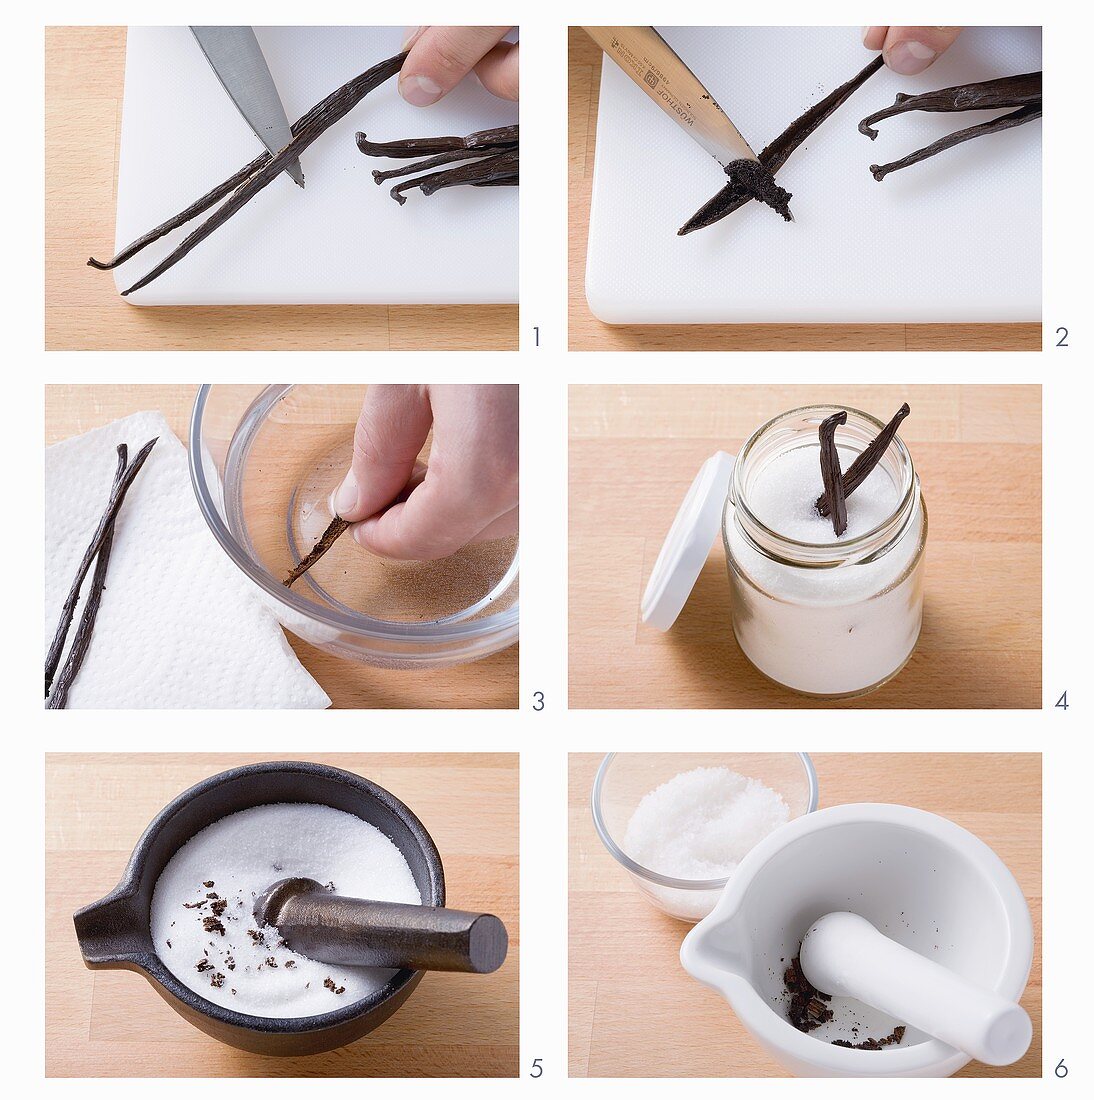 Using vanilla pods and seeds